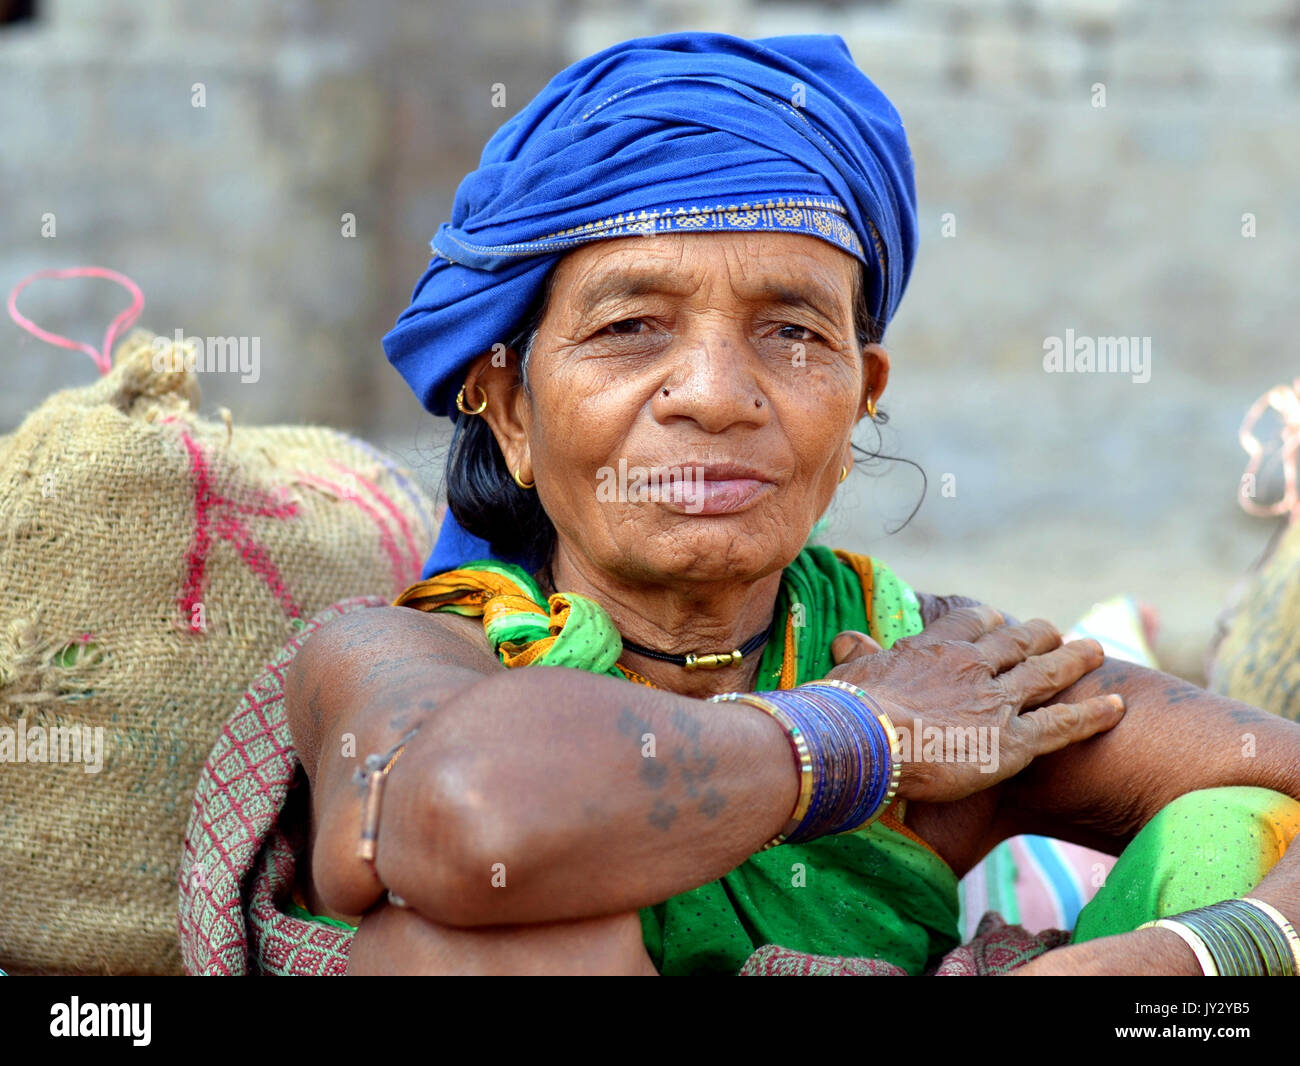 Elderly Indian Adivasi woman with blue head wrap and blue bangles poses for  the camera Stock Photo - Alamy